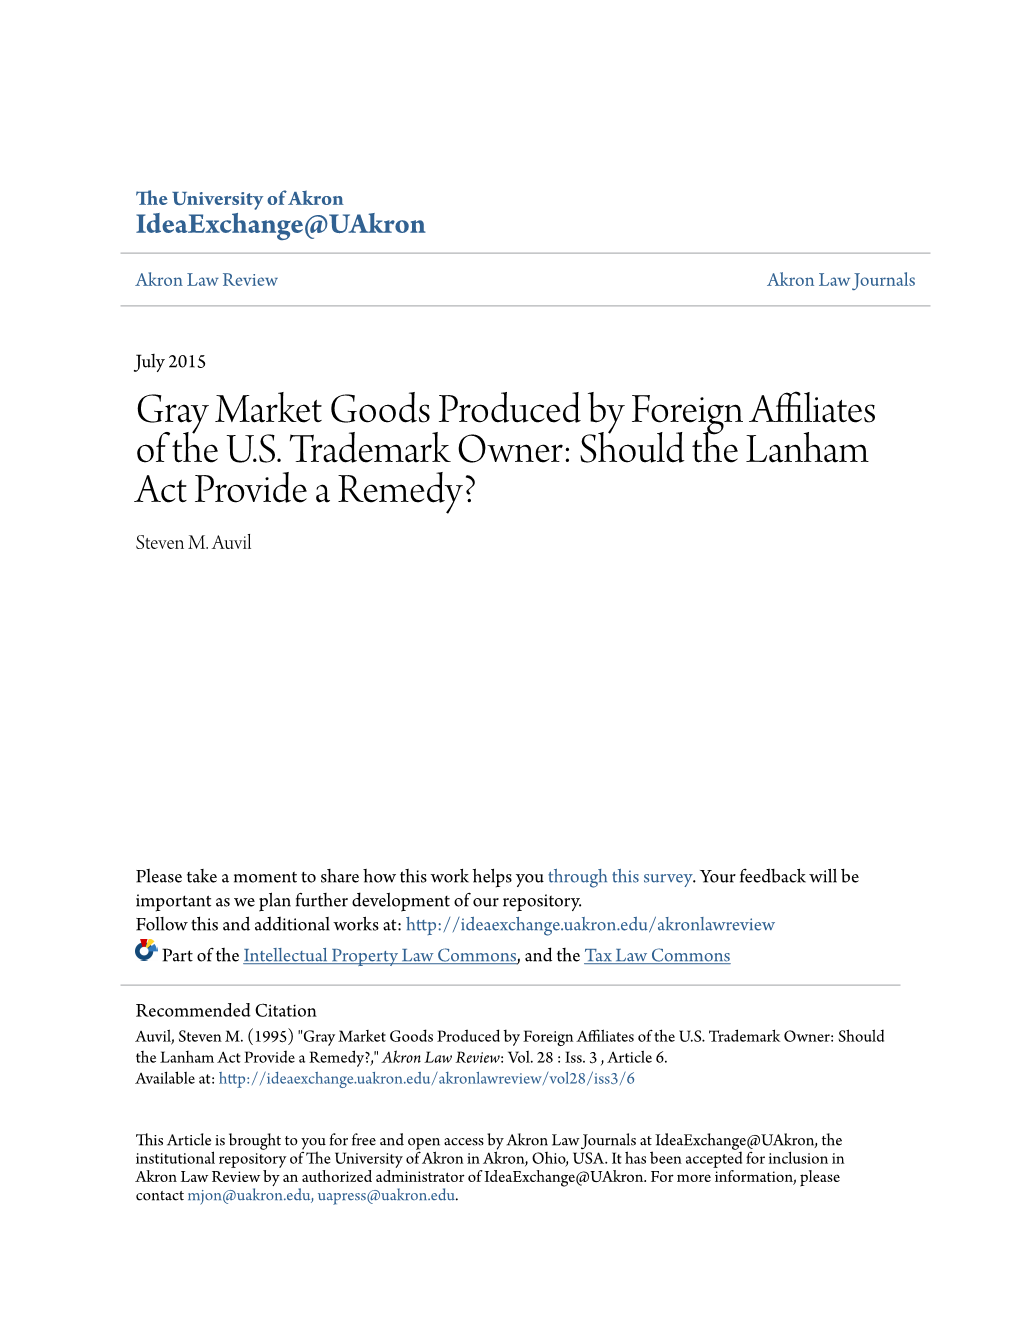 Gray Market Goods Produced by Foreign Affiliates of the U.S. Trademark Owner: Should the Lanham Act Provide a Remedy? Steven M